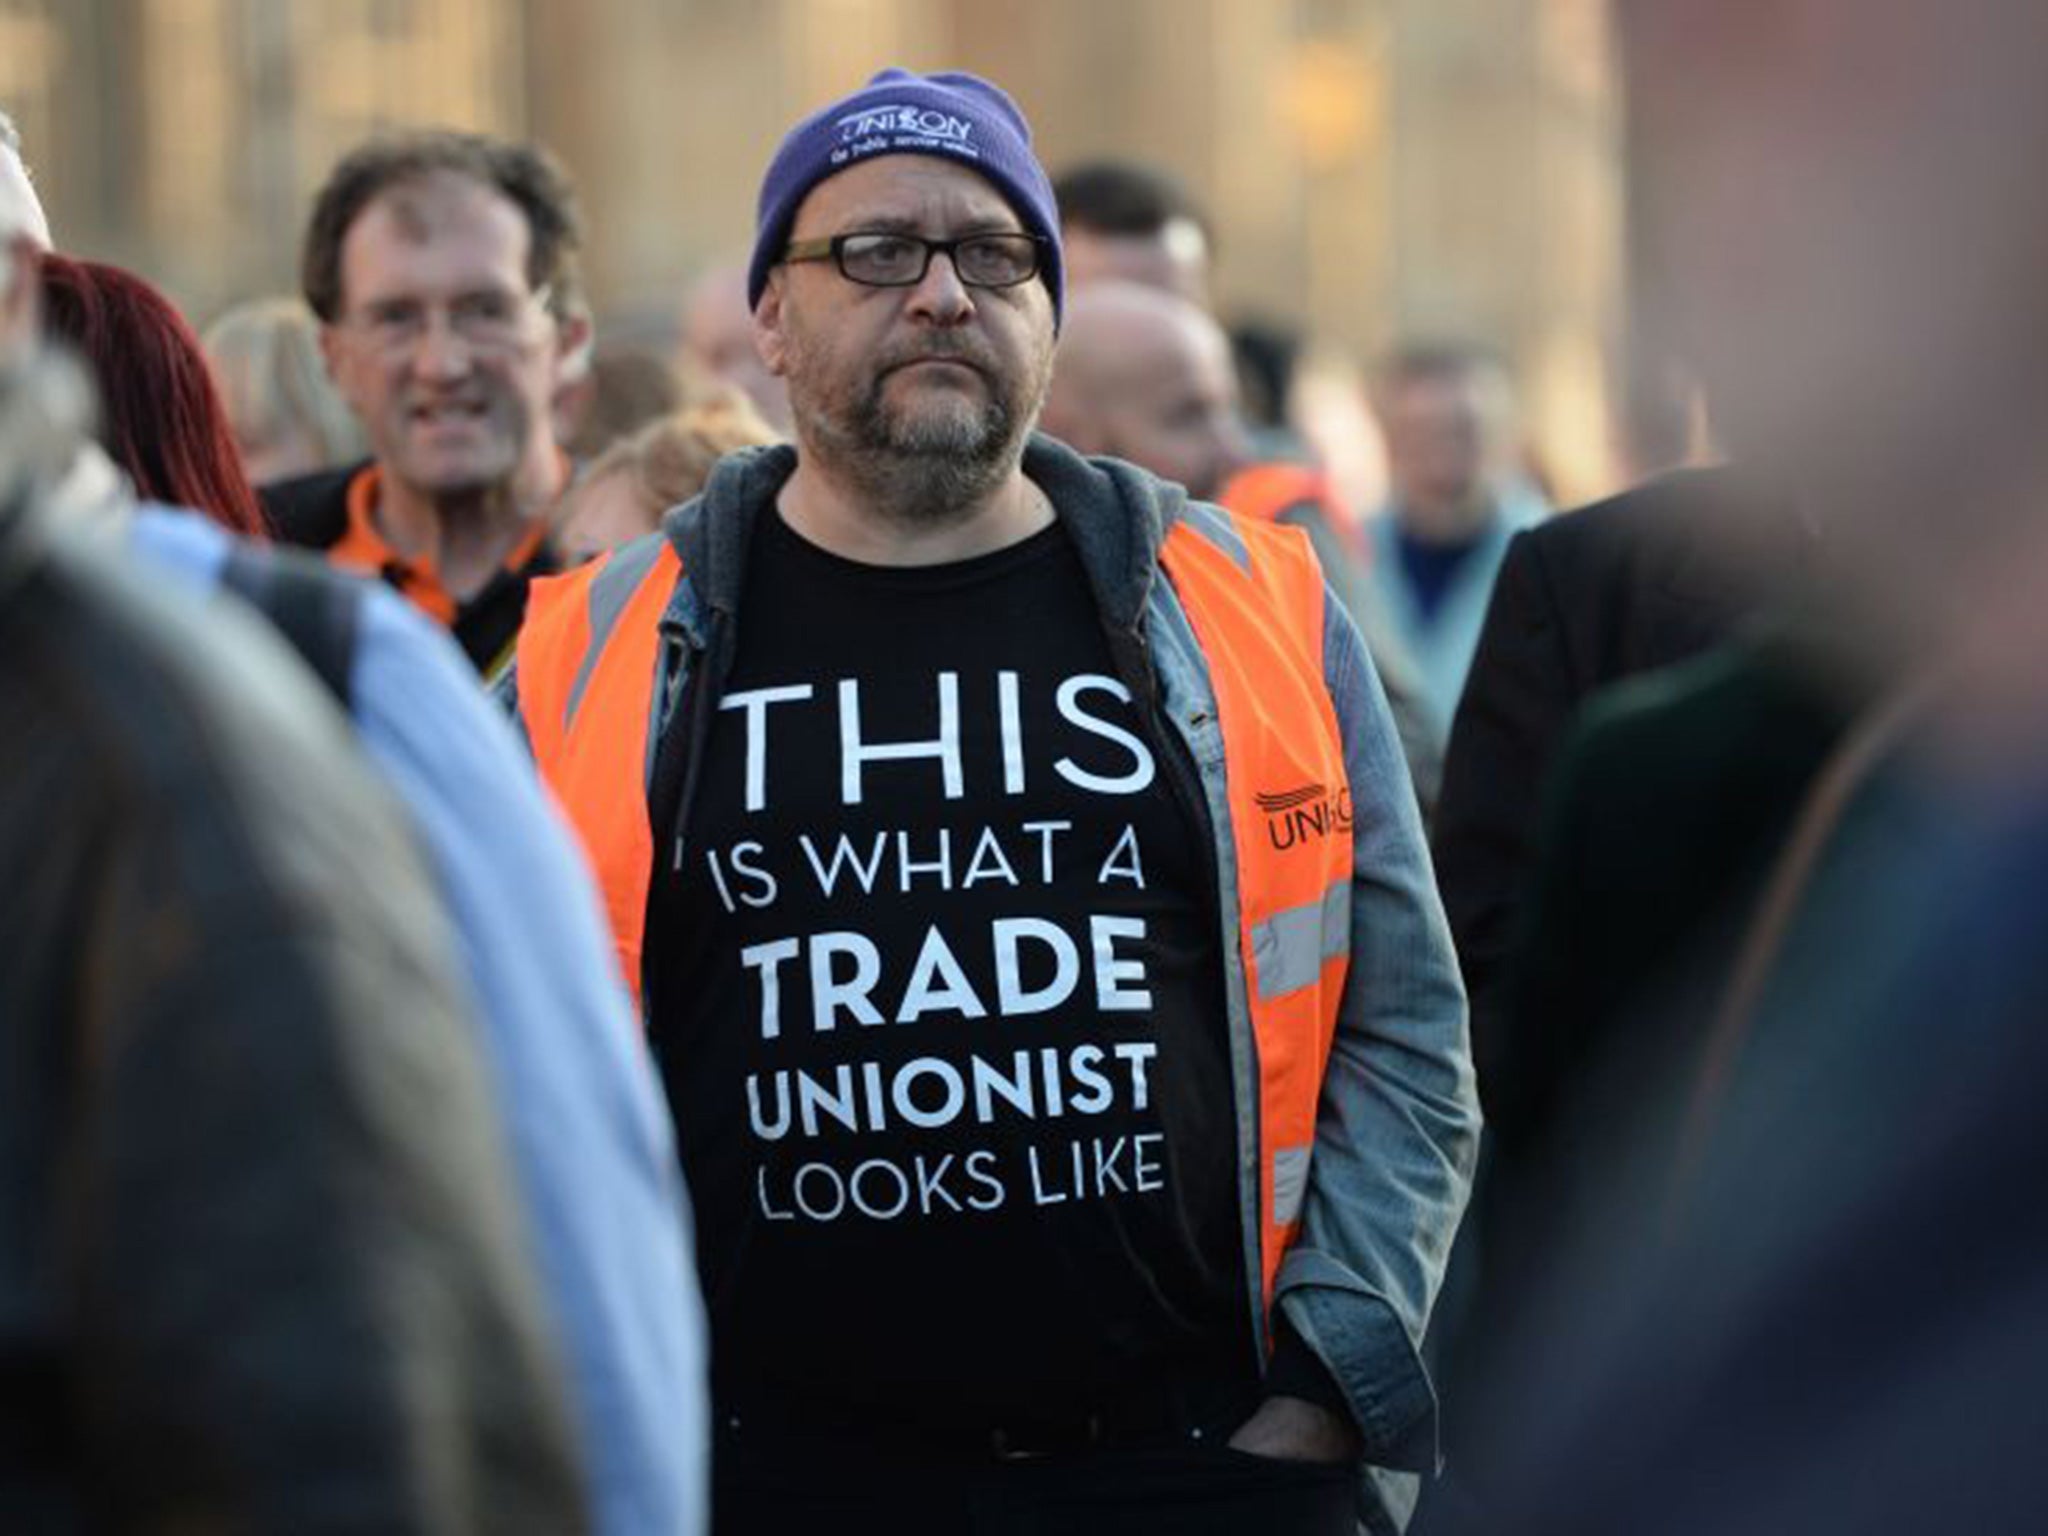 TUC members queue outside the Houses of Parliament to lobby against the Trade Union